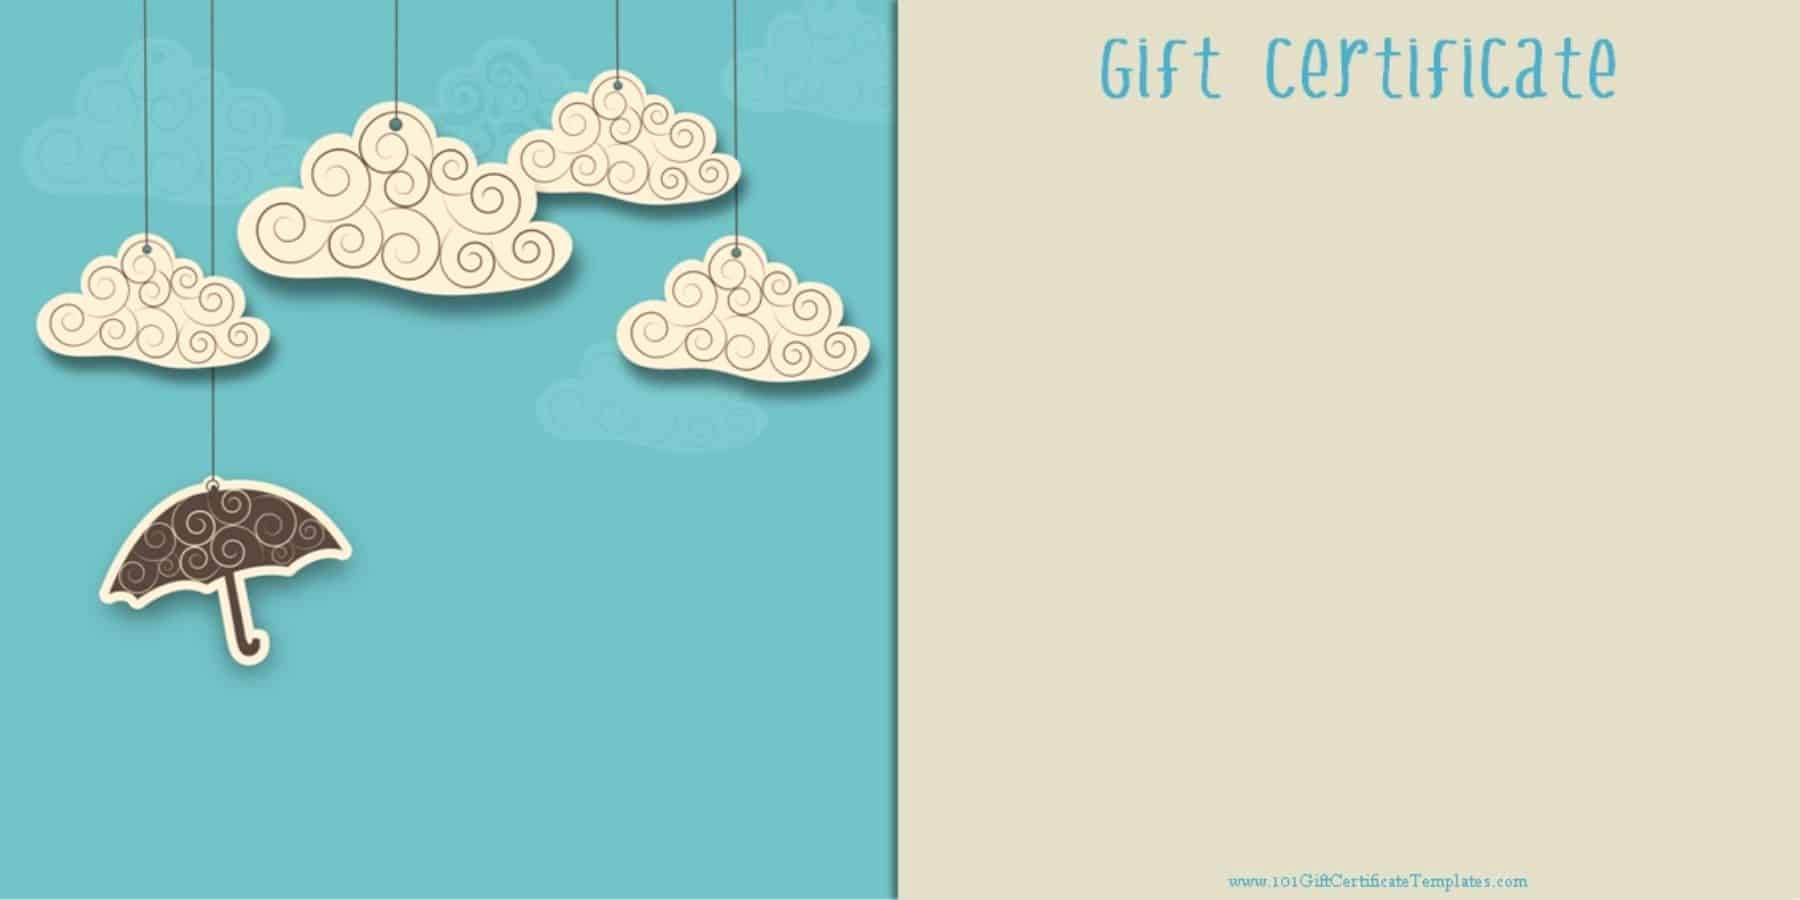 Create A Gift Certificate Free Inspirational Printable Gift Certificate Templates